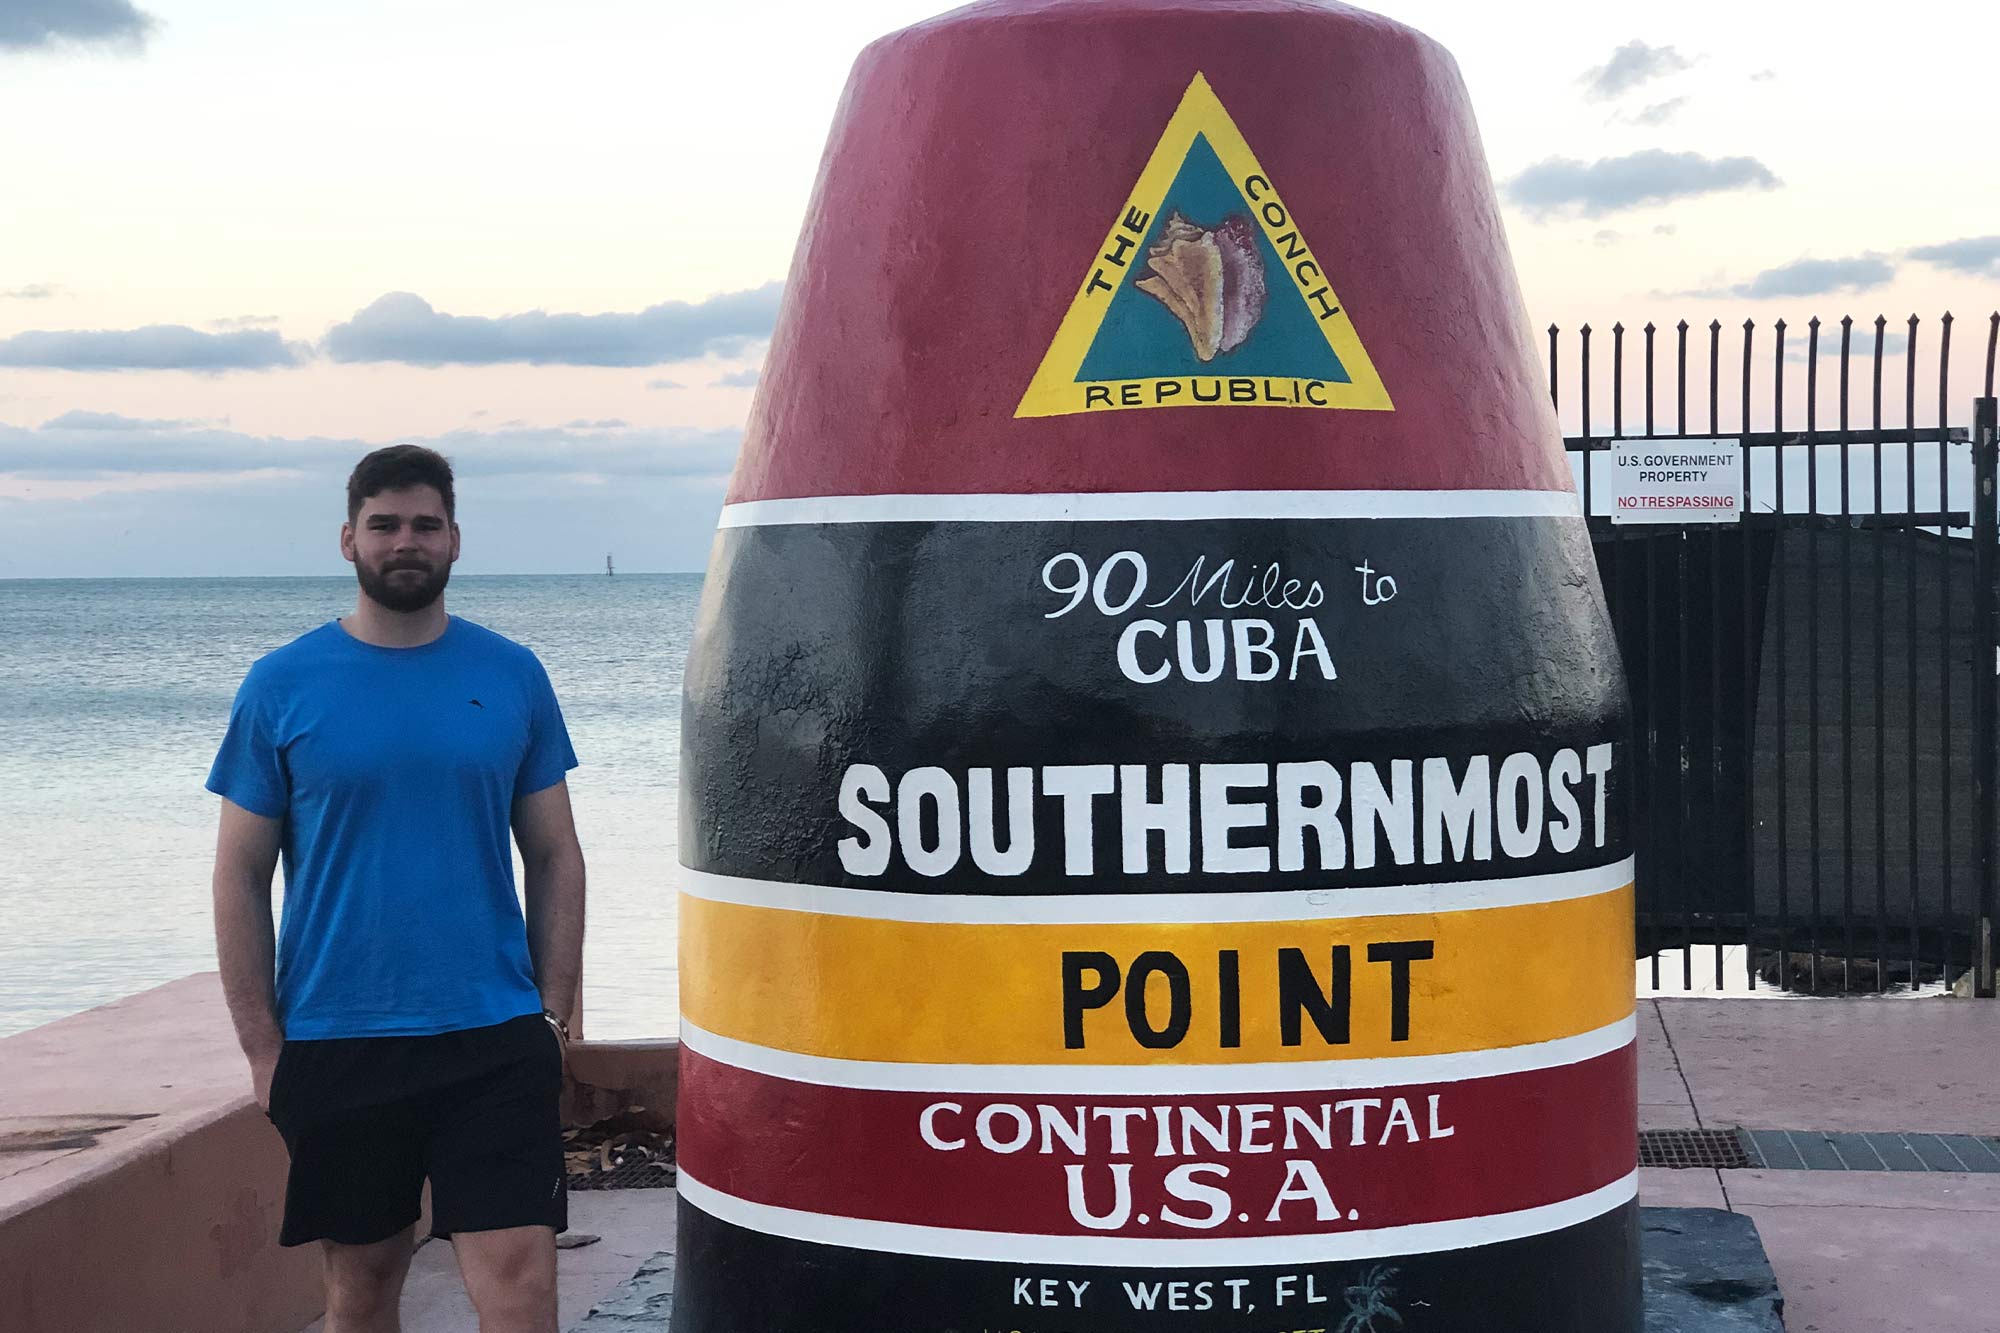 Pleško stands next to a red, black, and yellow monument in front of the ocean that reads "90 miles to Cuba Southernmost Point Continental U.S.A. Key West, FL"